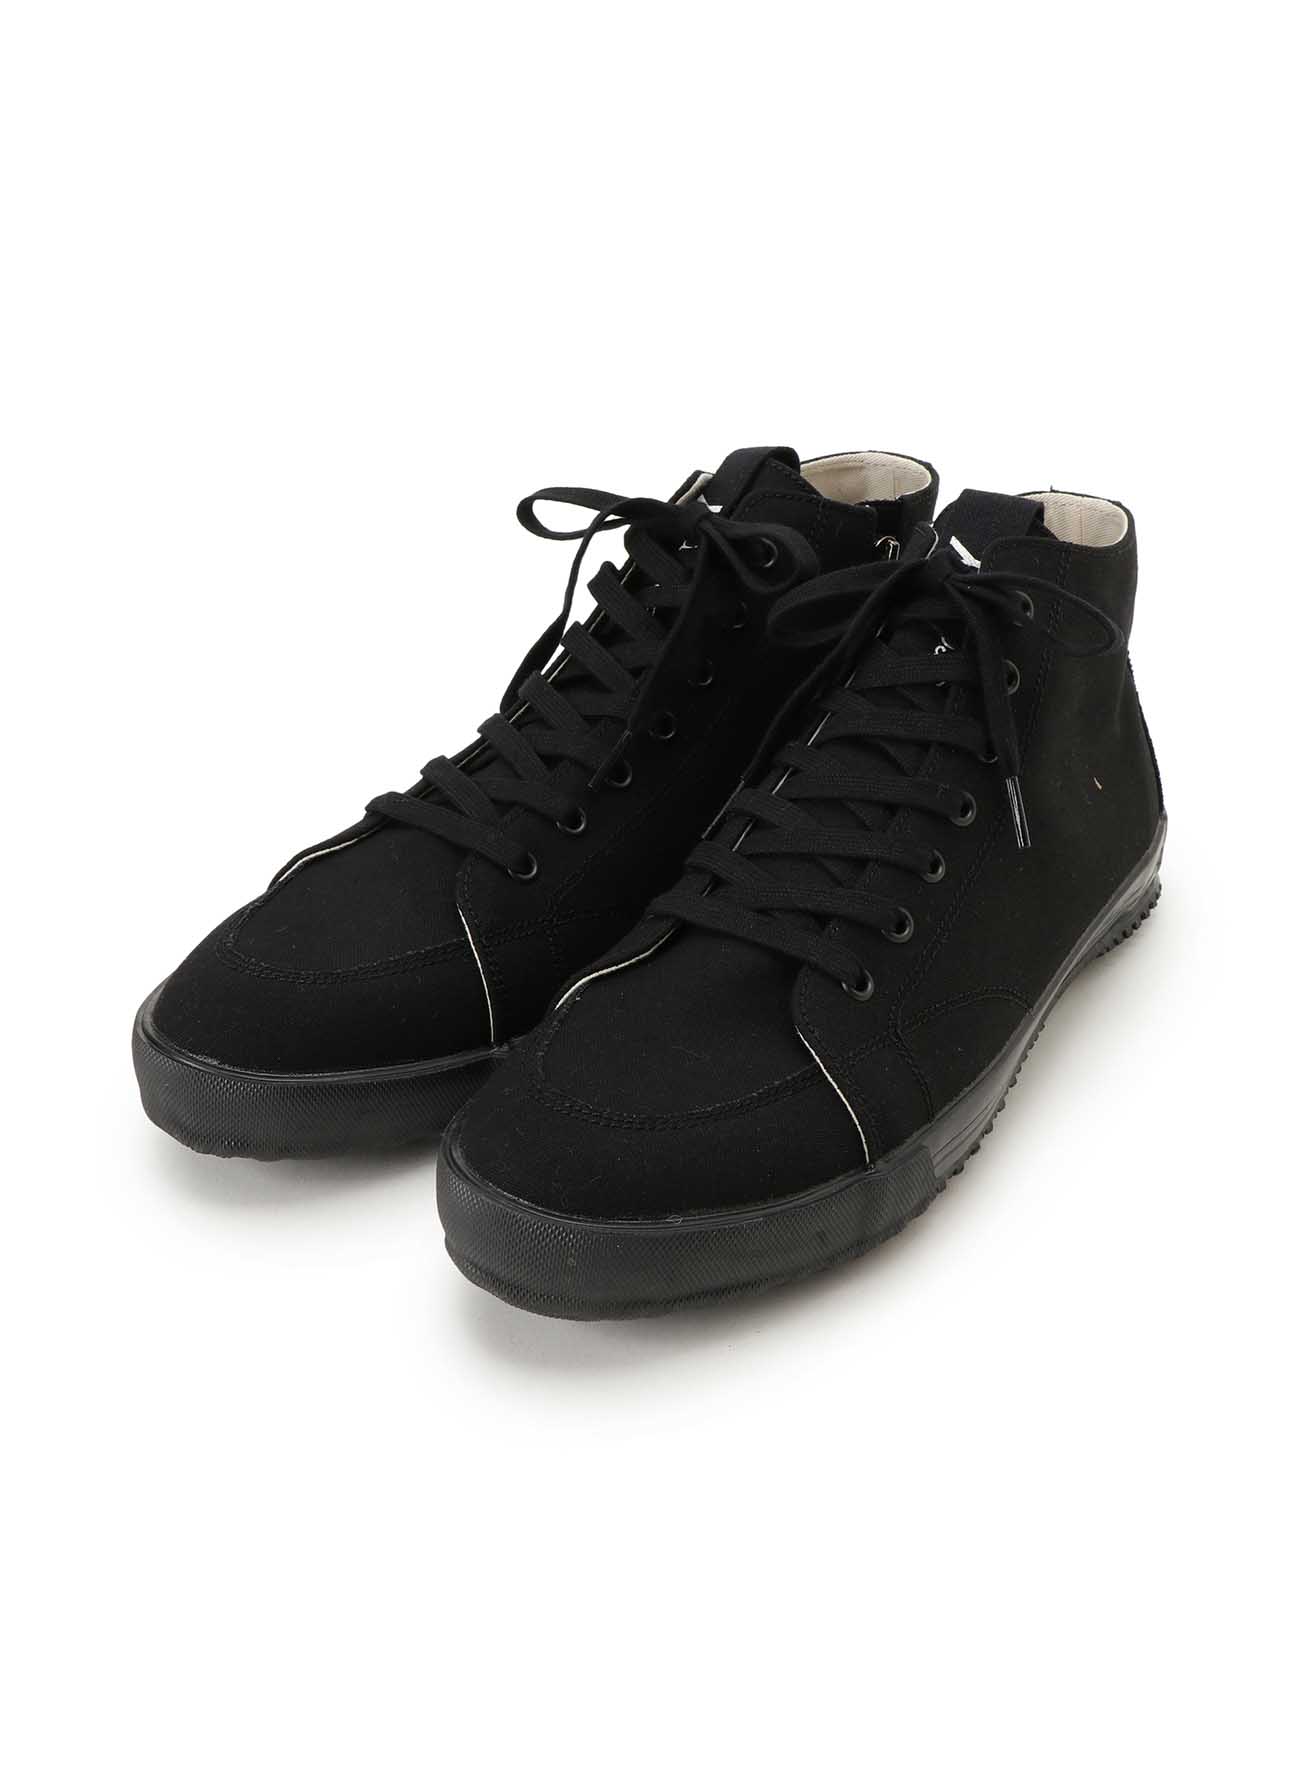 Cotton canvas Middle rise sneakers